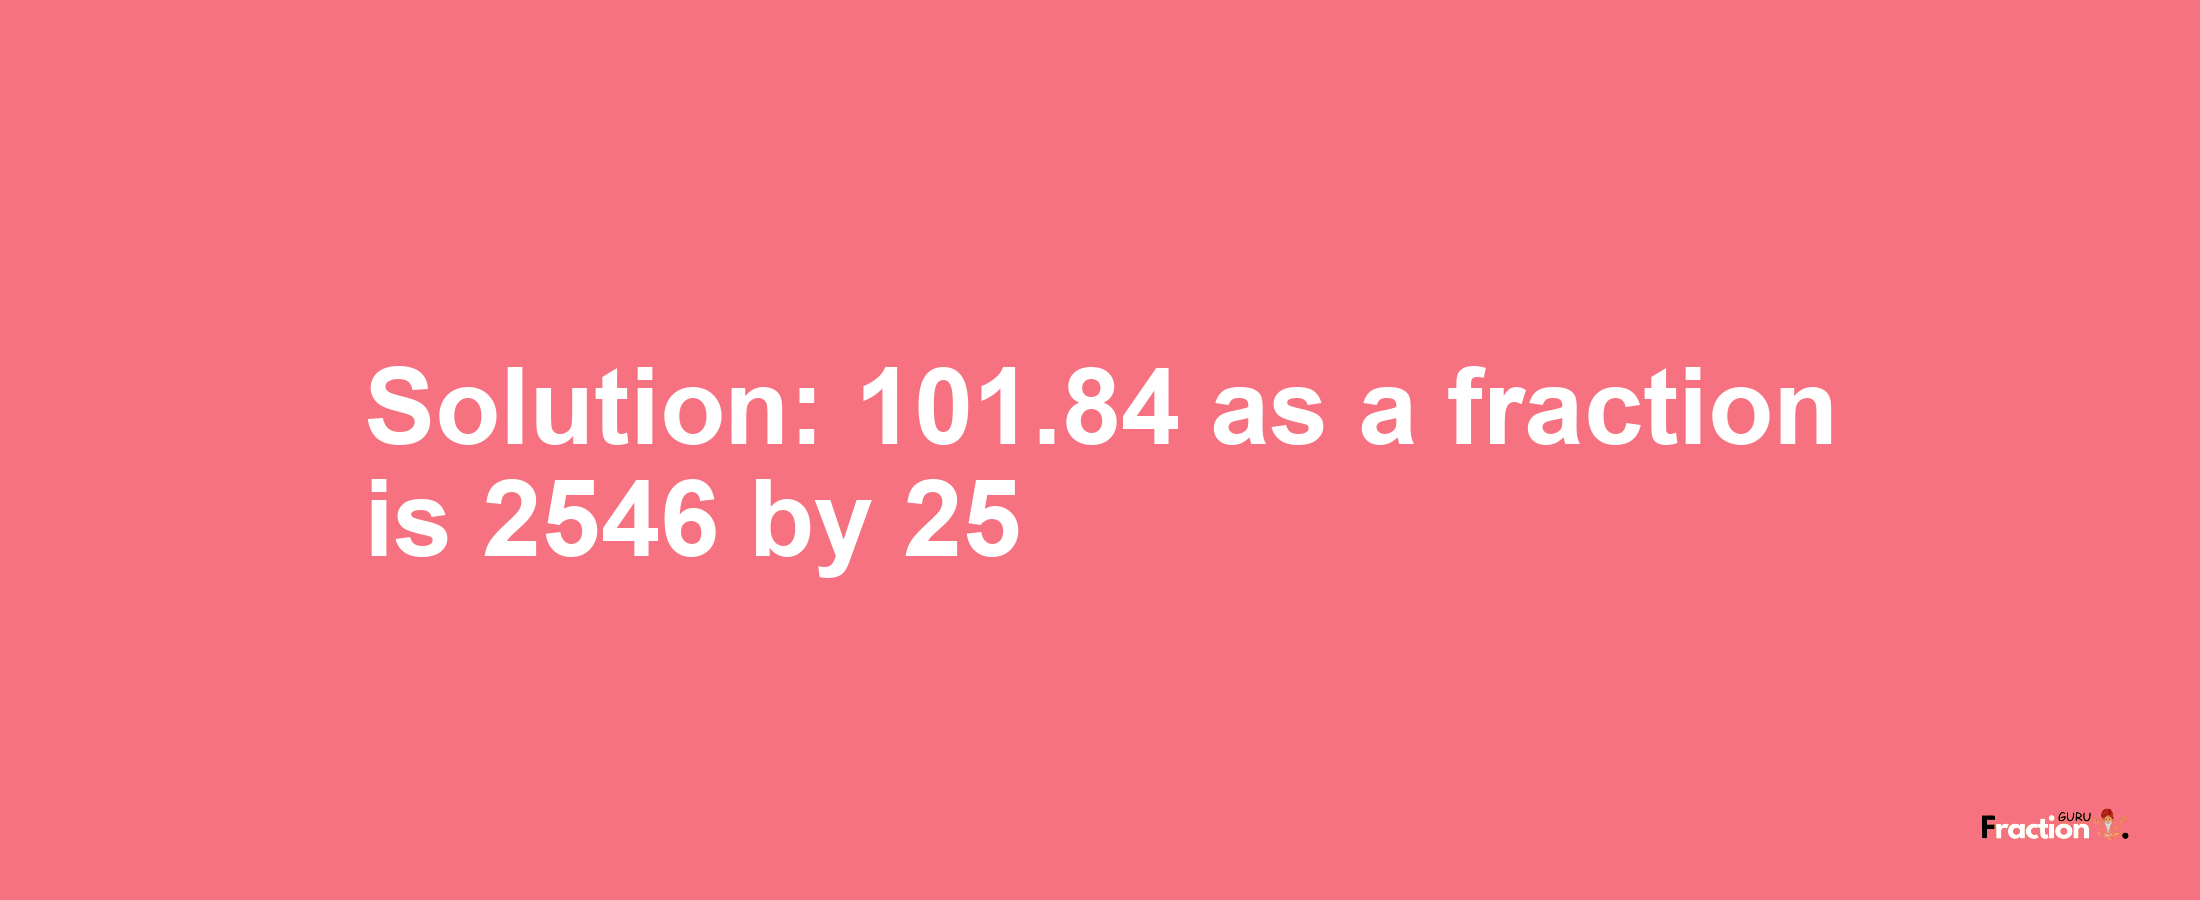 Solution:101.84 as a fraction is 2546/25